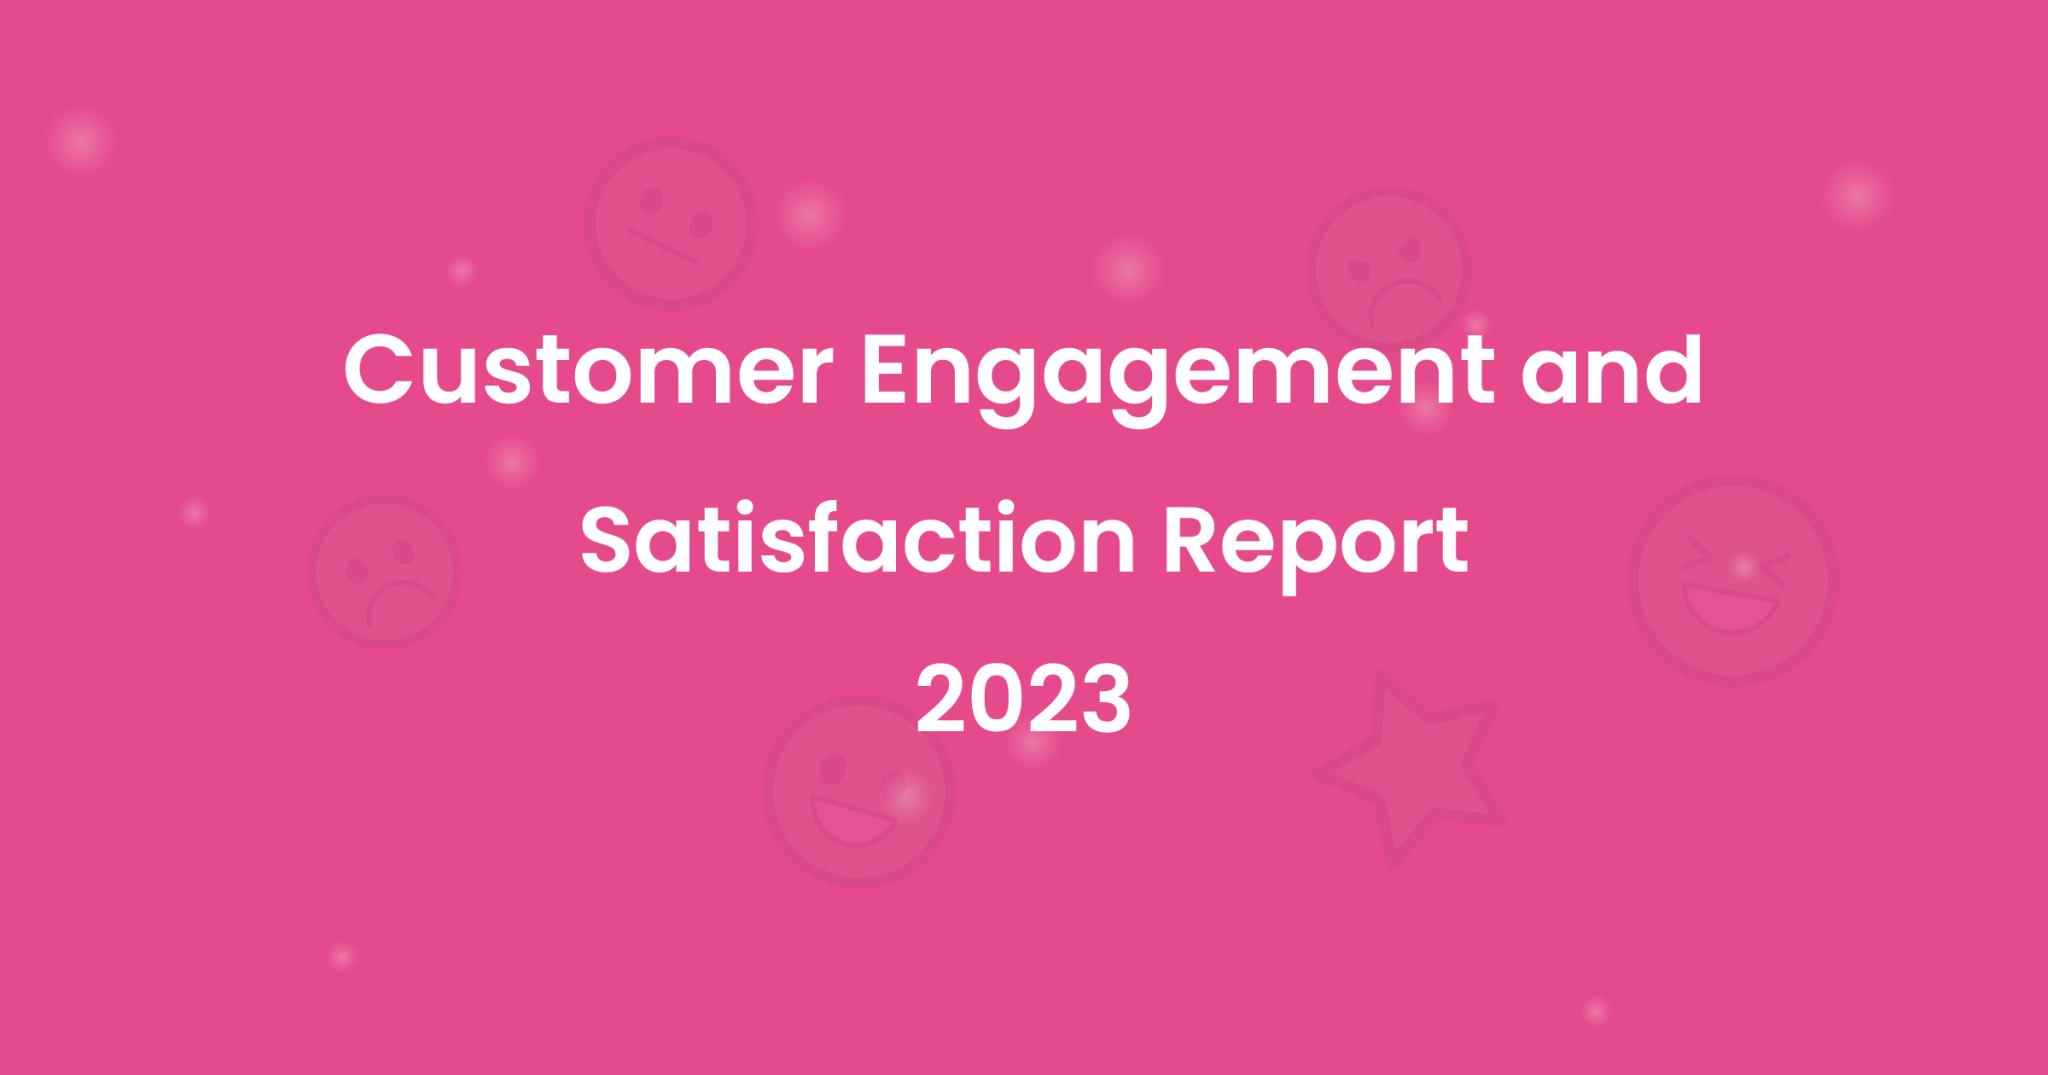 Customer Engagement and Satisfaction Report